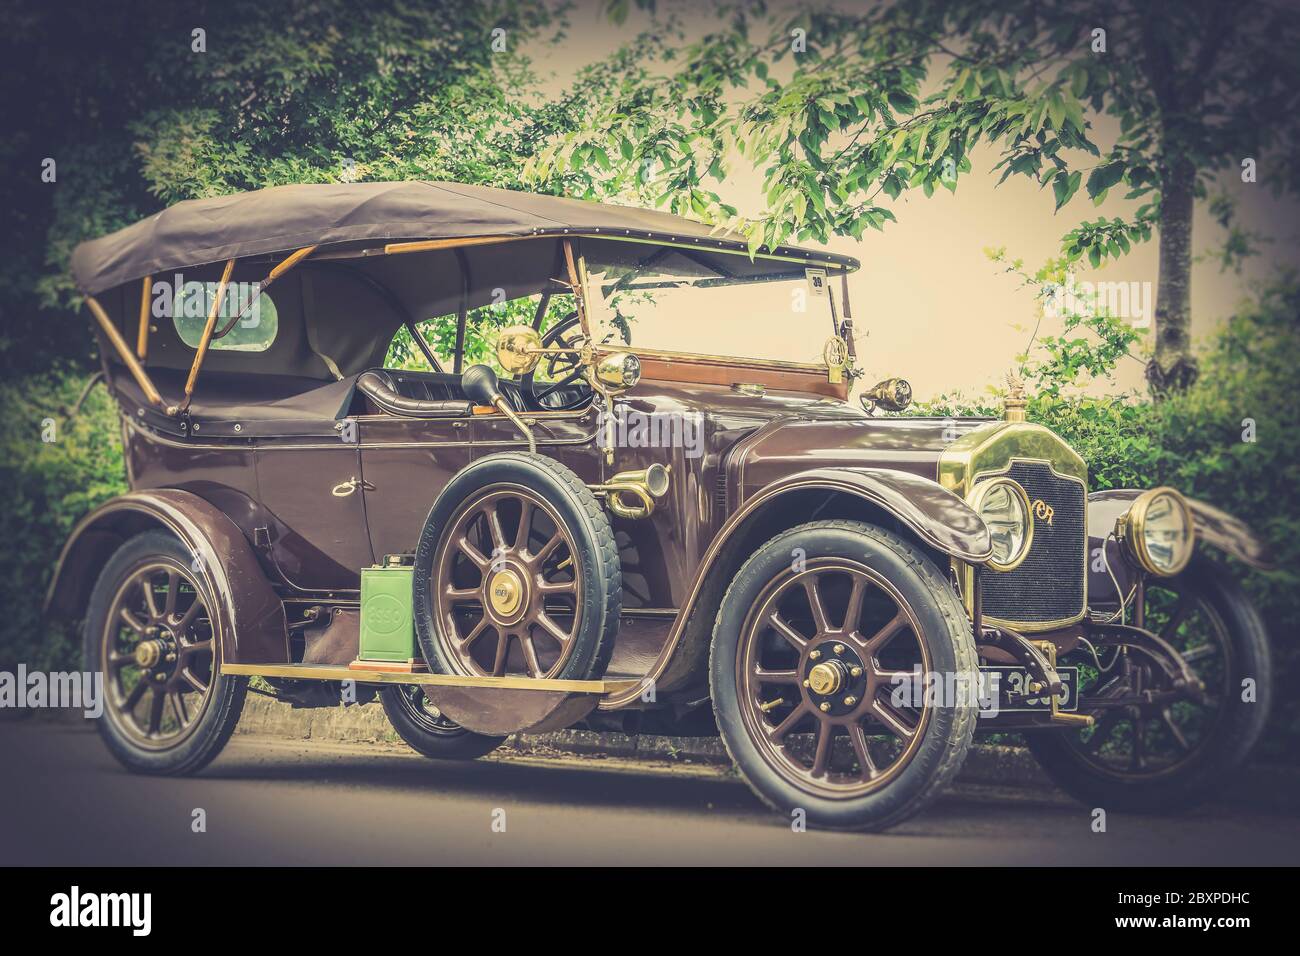 Side view of vintage UK Rover motor car isolated outdoors in summer sunshine. British classic cars. Stock Photo